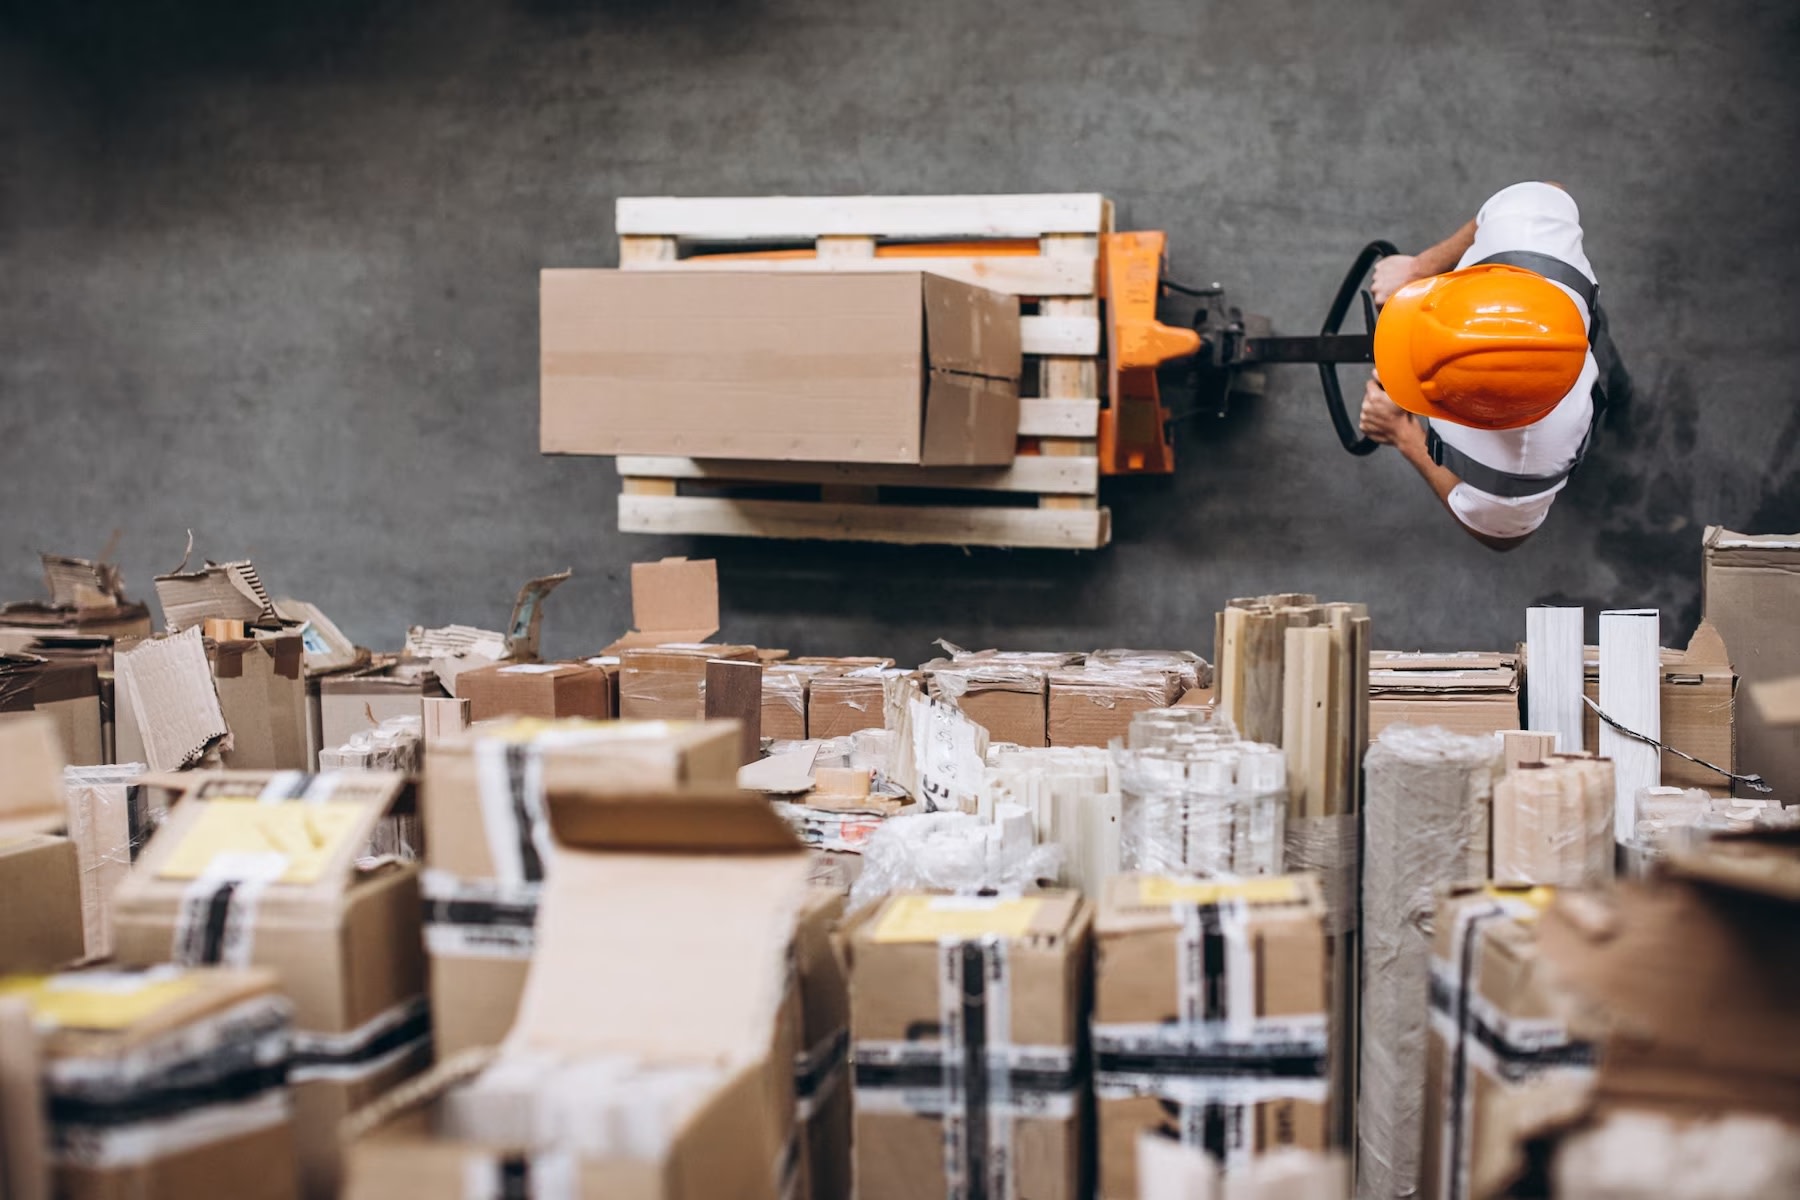 Image from above of man pushing cart in warehouse full of packaging